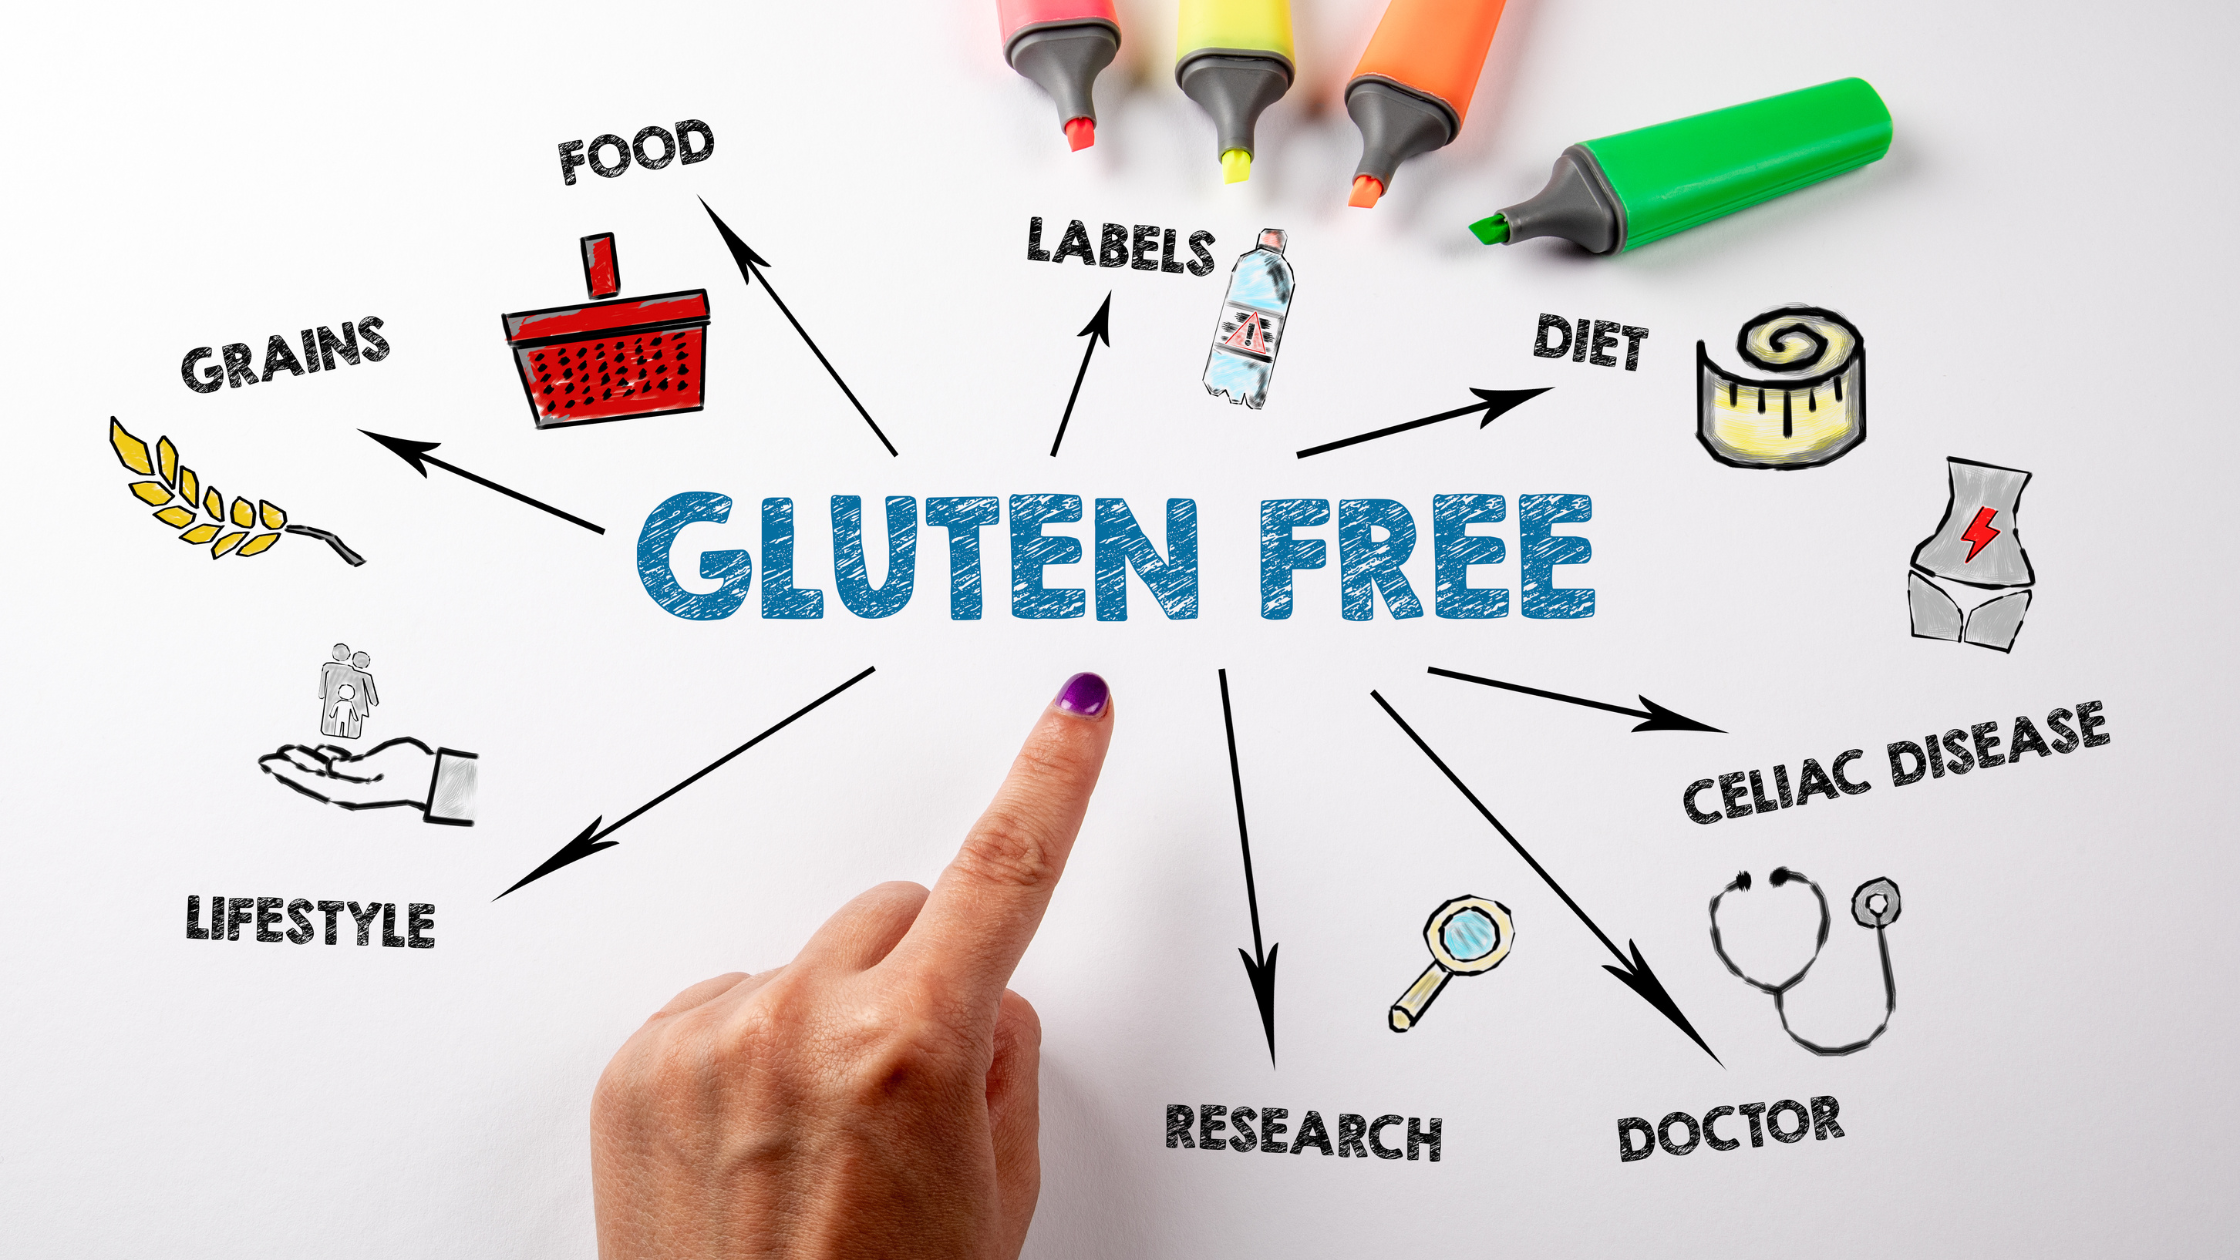 "GLUTEN FREE" surrounded by related terms like "diet," "celiac disease," and "research"